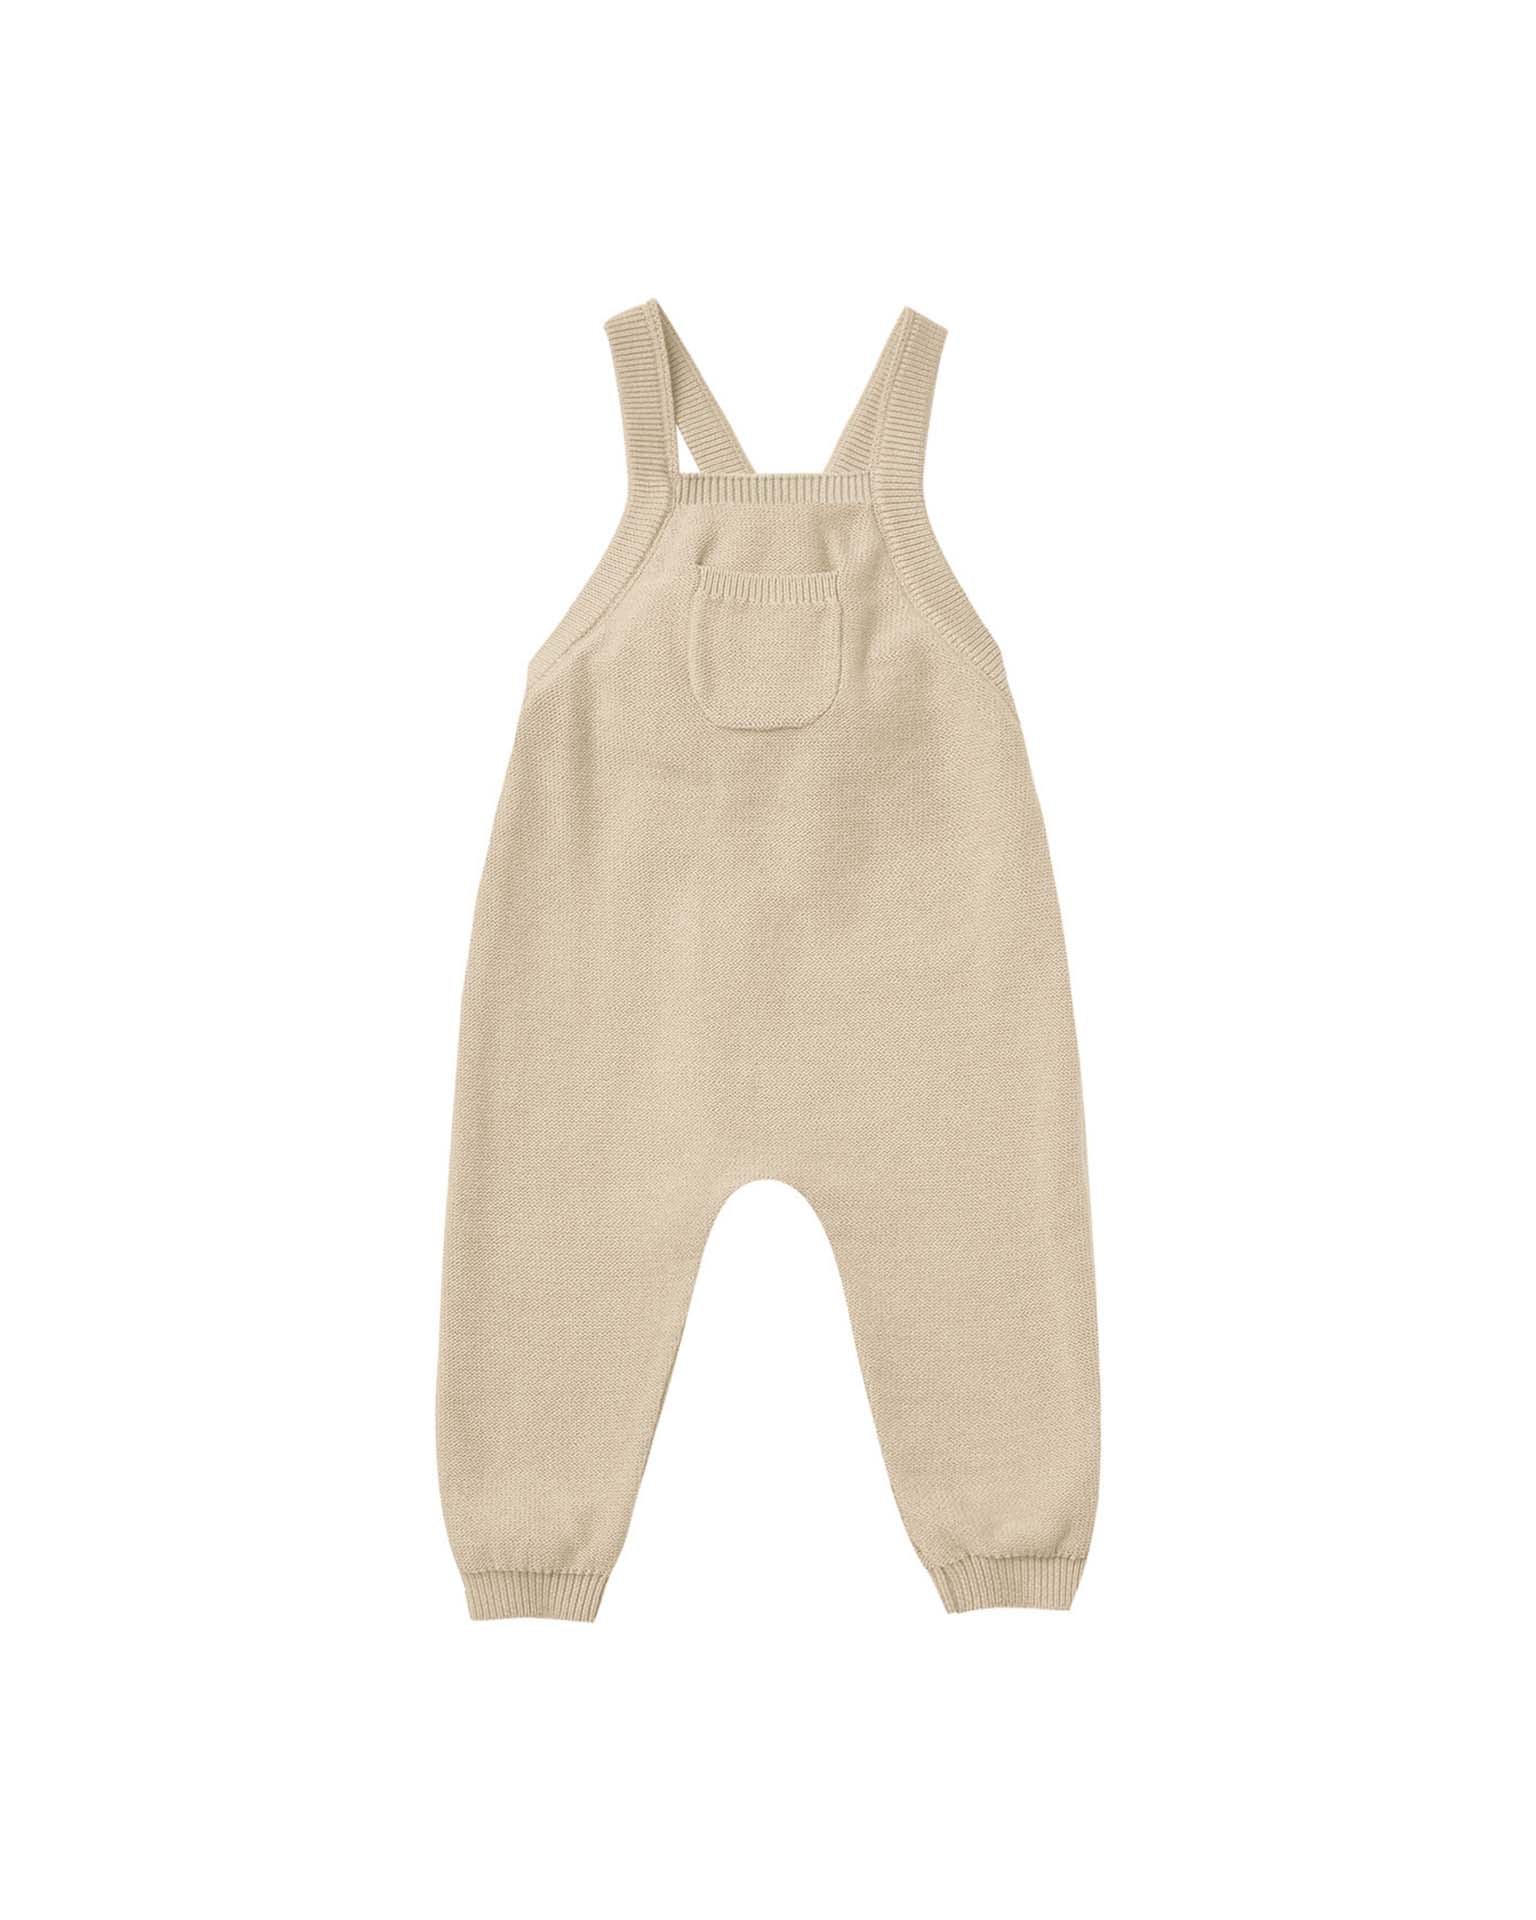 Little quincy mae BABY knit overall in sand